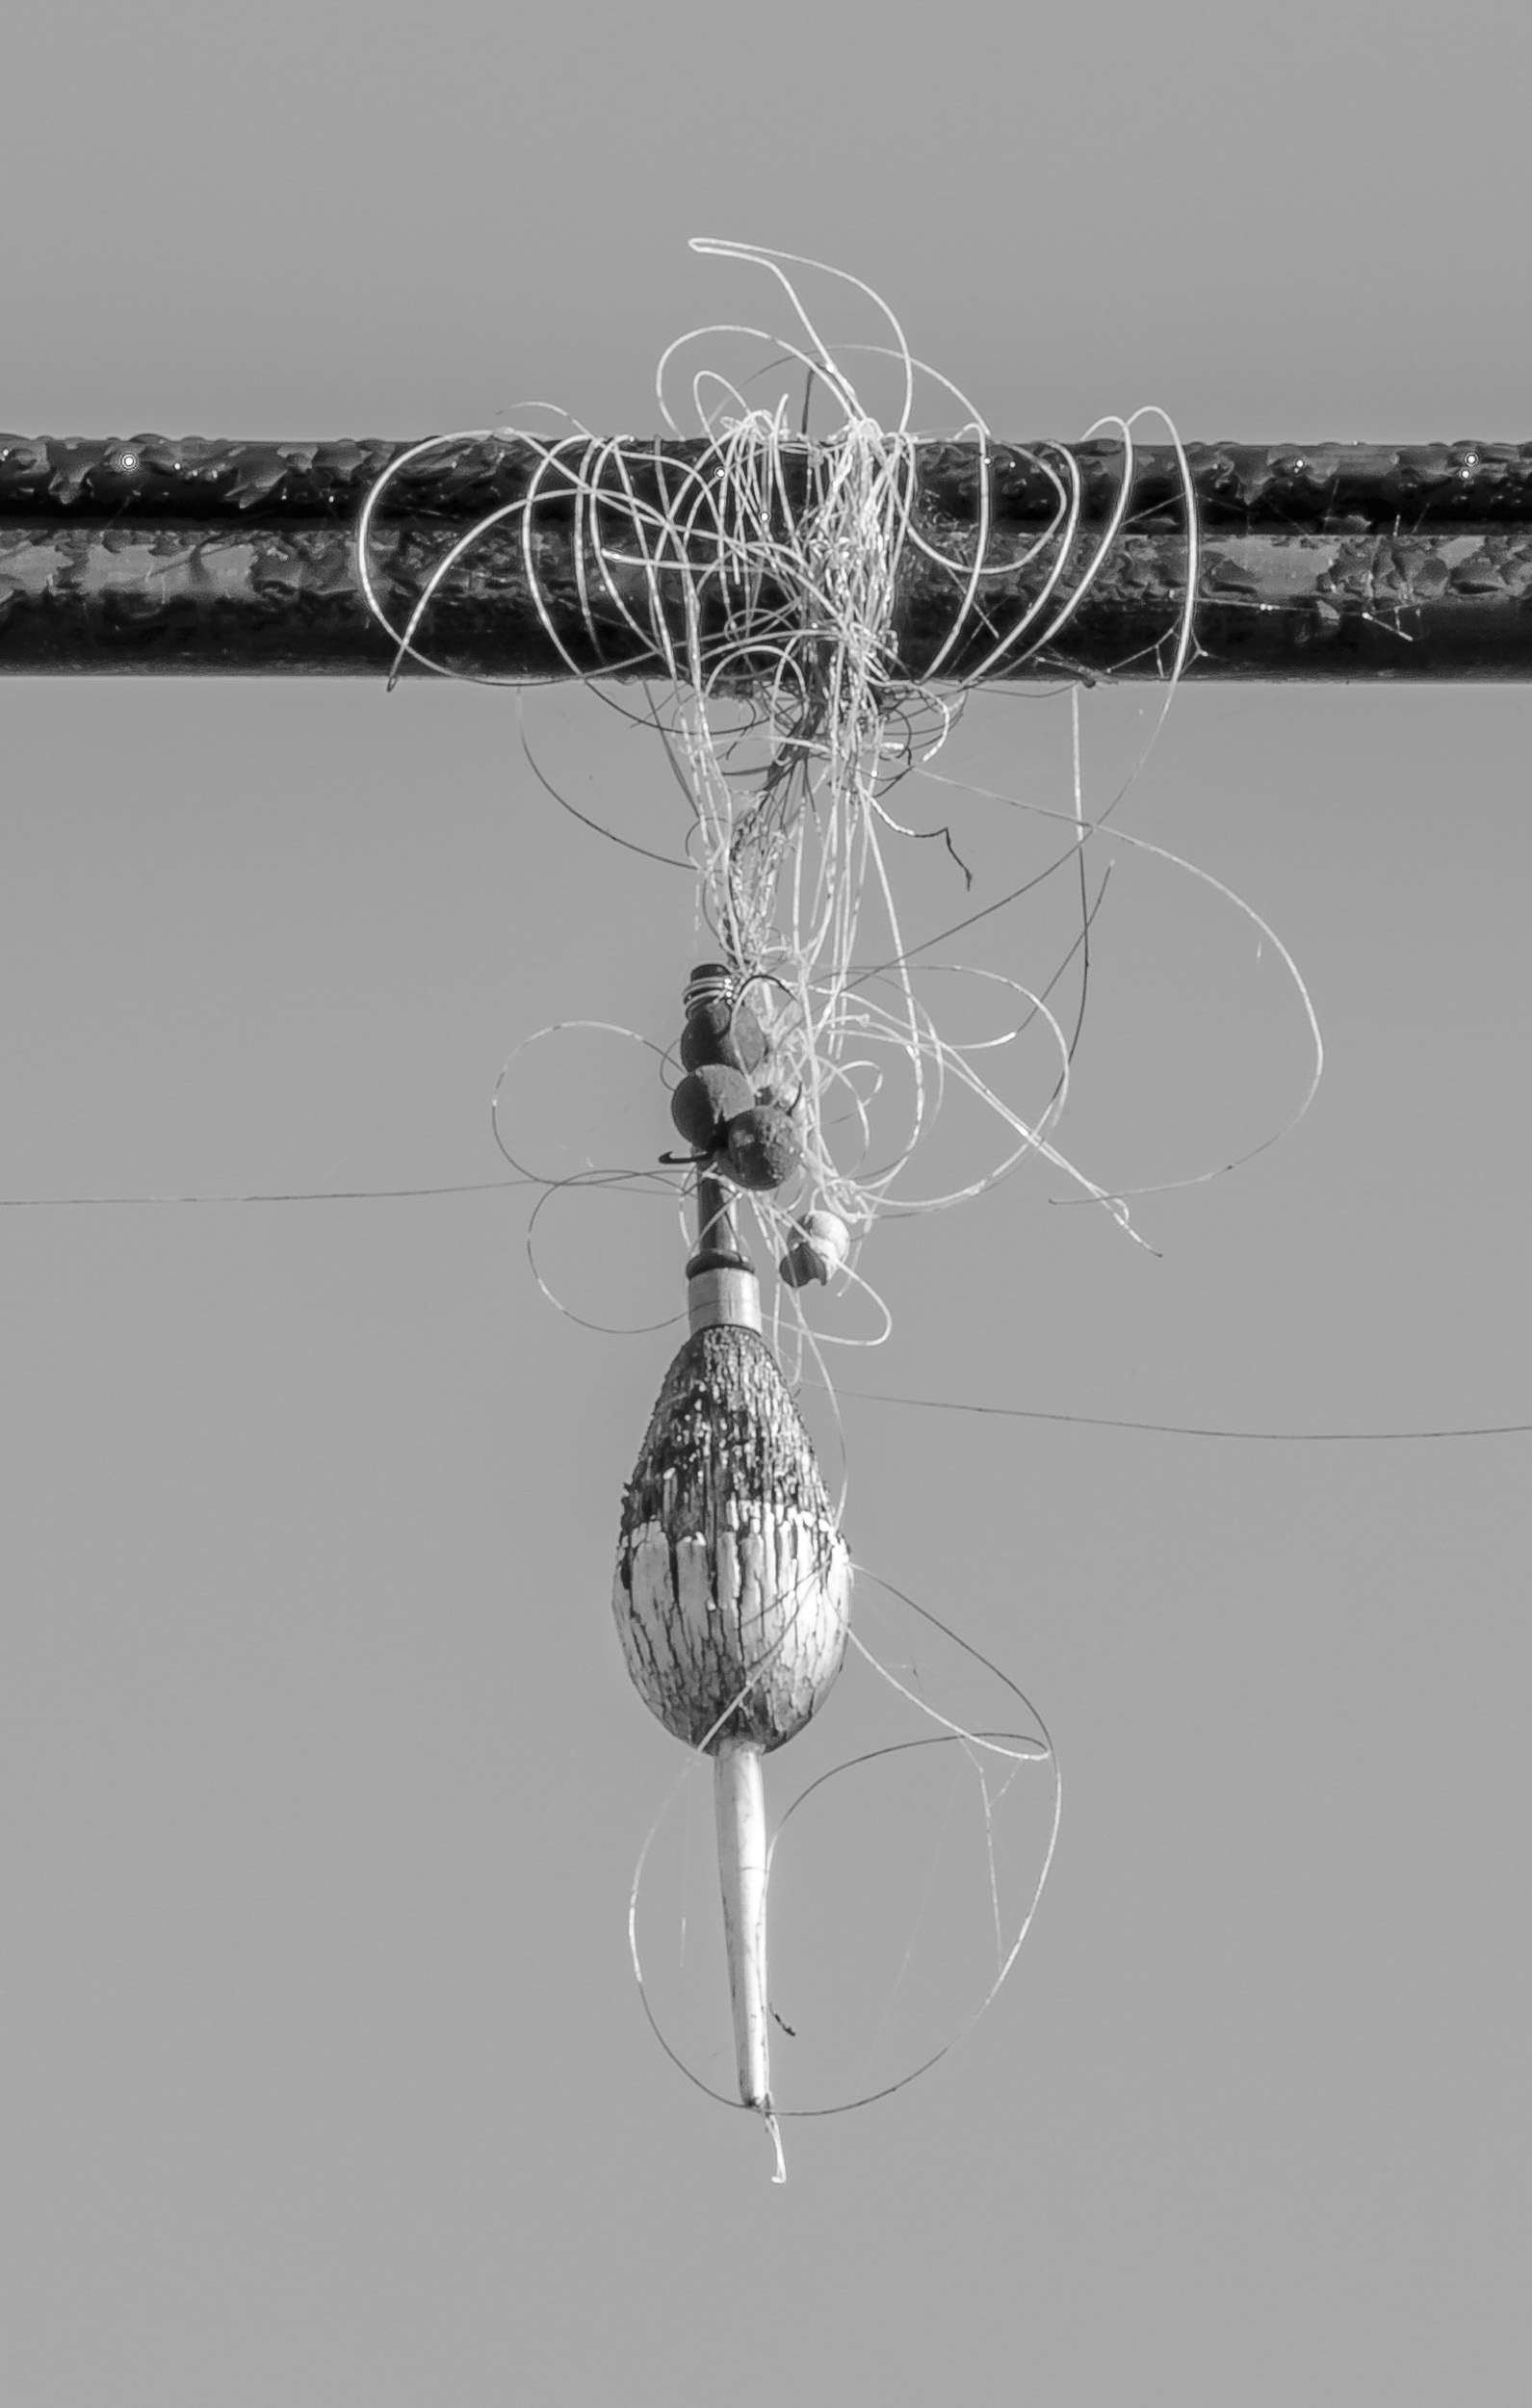 tangle of fishing line, weights, and float wrapped on utility line